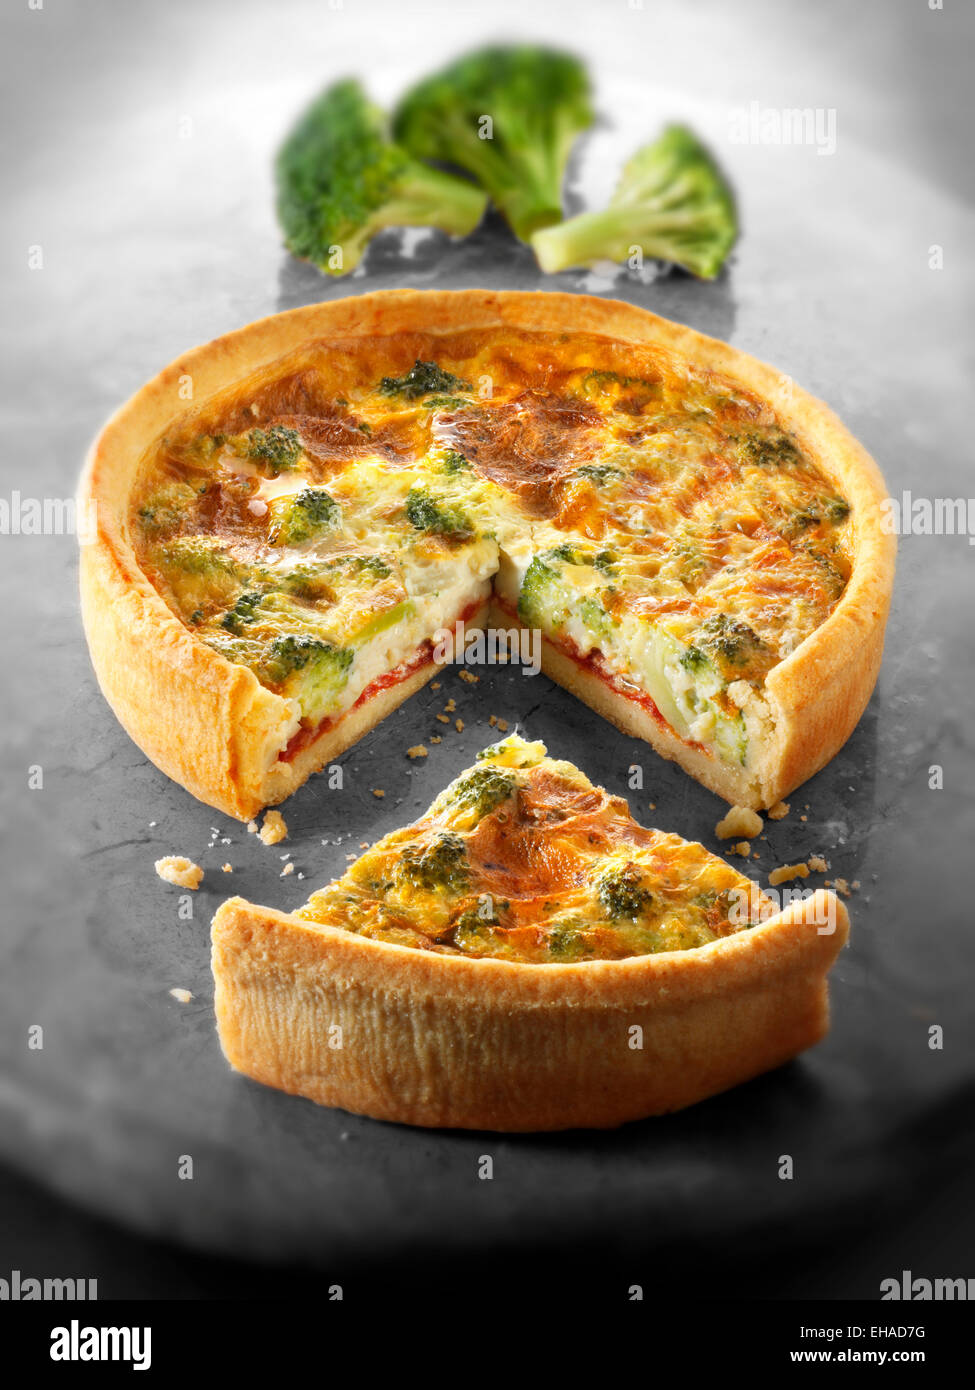 Whole broccoli quiche with a slice out Stock Photo